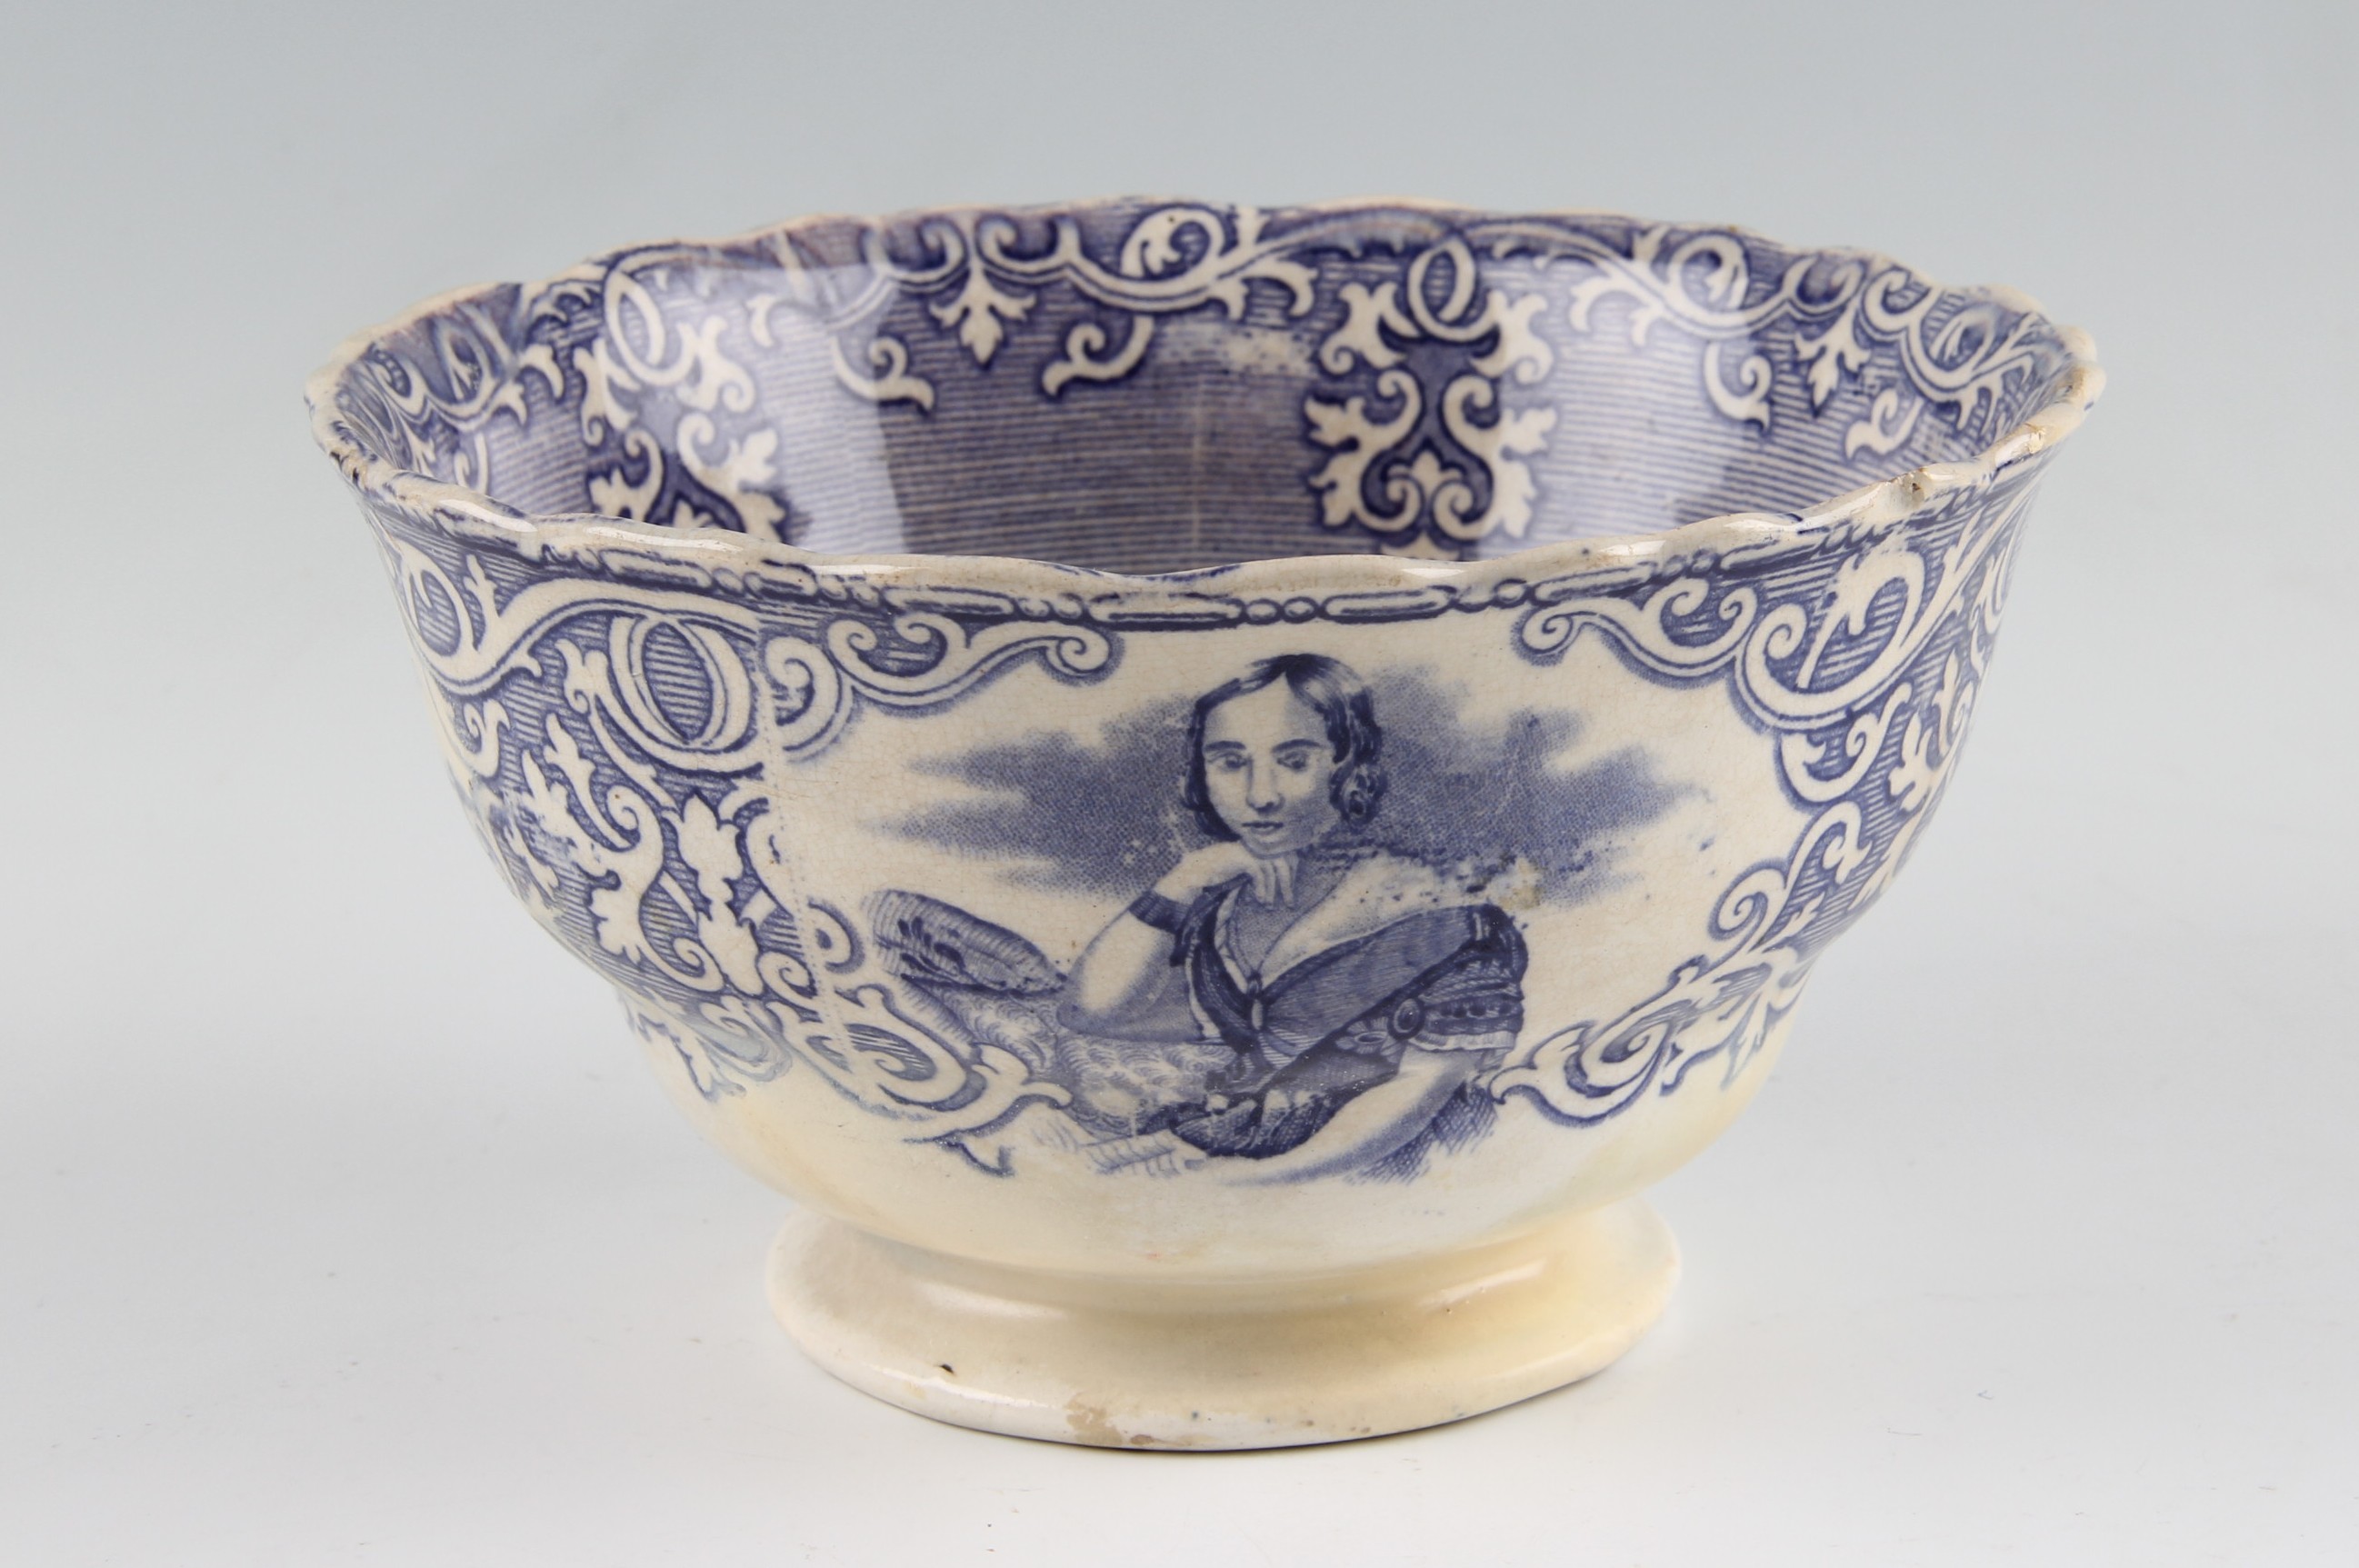 A Staffordshire pottery Royal commemorative bowl, transfer printed with the young Queen Victoria